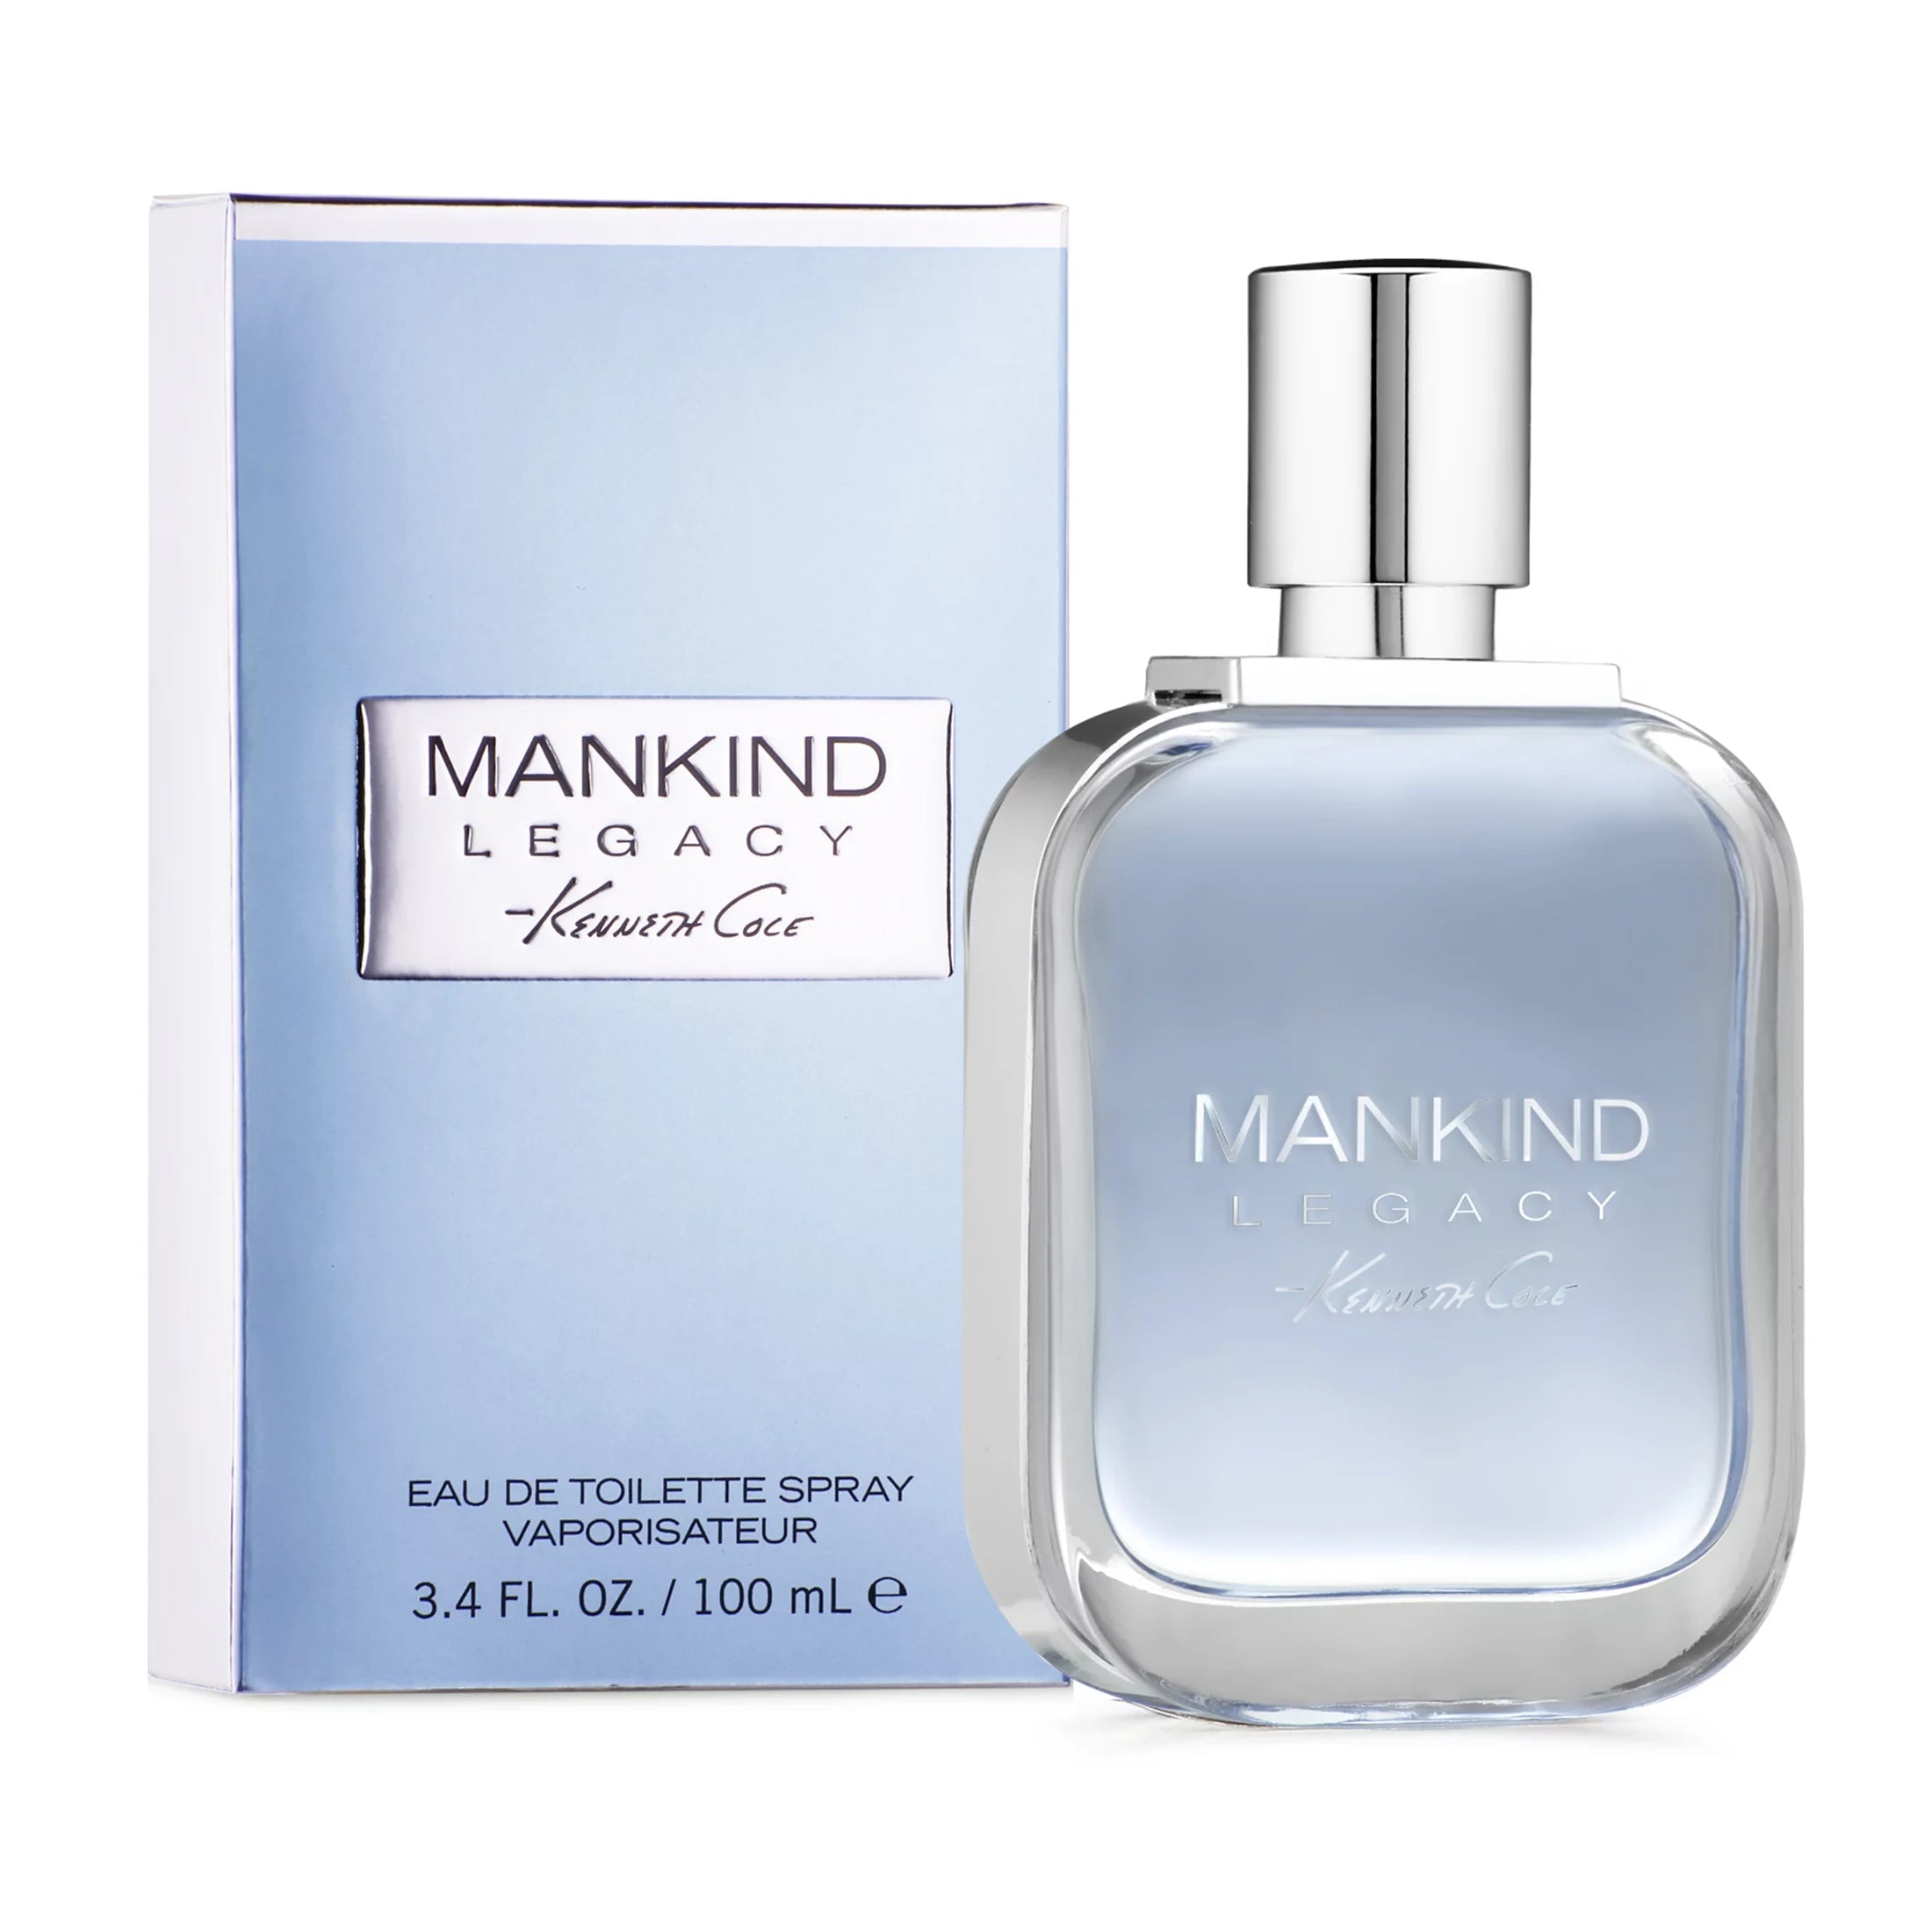 Mankind Legacy for Men by Kenneth Cole 3.4 oz